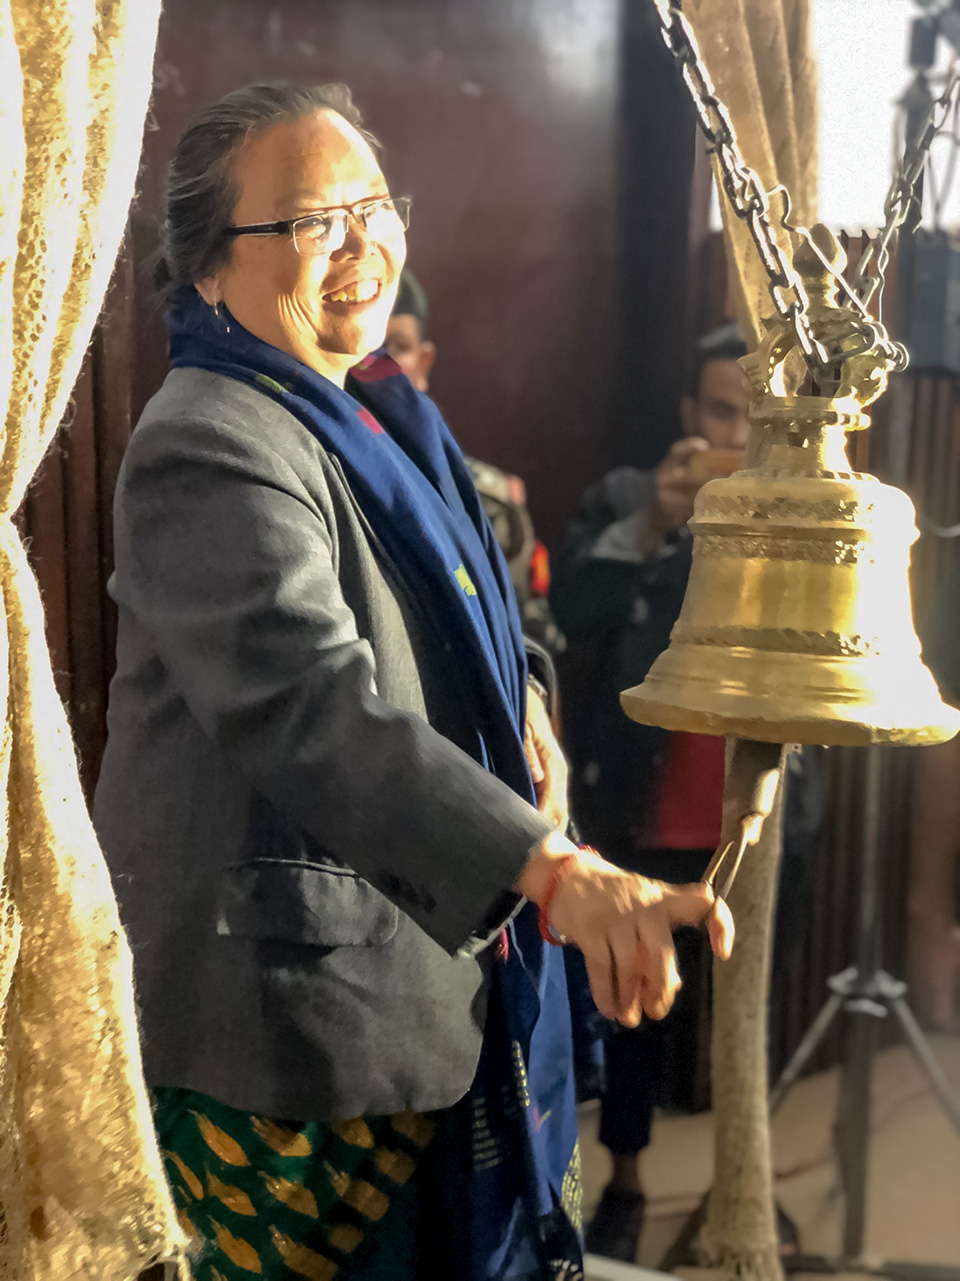 Tham Maya Thapa, former Minister of Women, Children and Senior Citizen, ringing the Nepali bell to launch the national consultation for Beijing+25 review organized by National Network of Beijing Review Nepal (NNBN) with UN Women’s support. Photo: UN Women/Naresh Newar